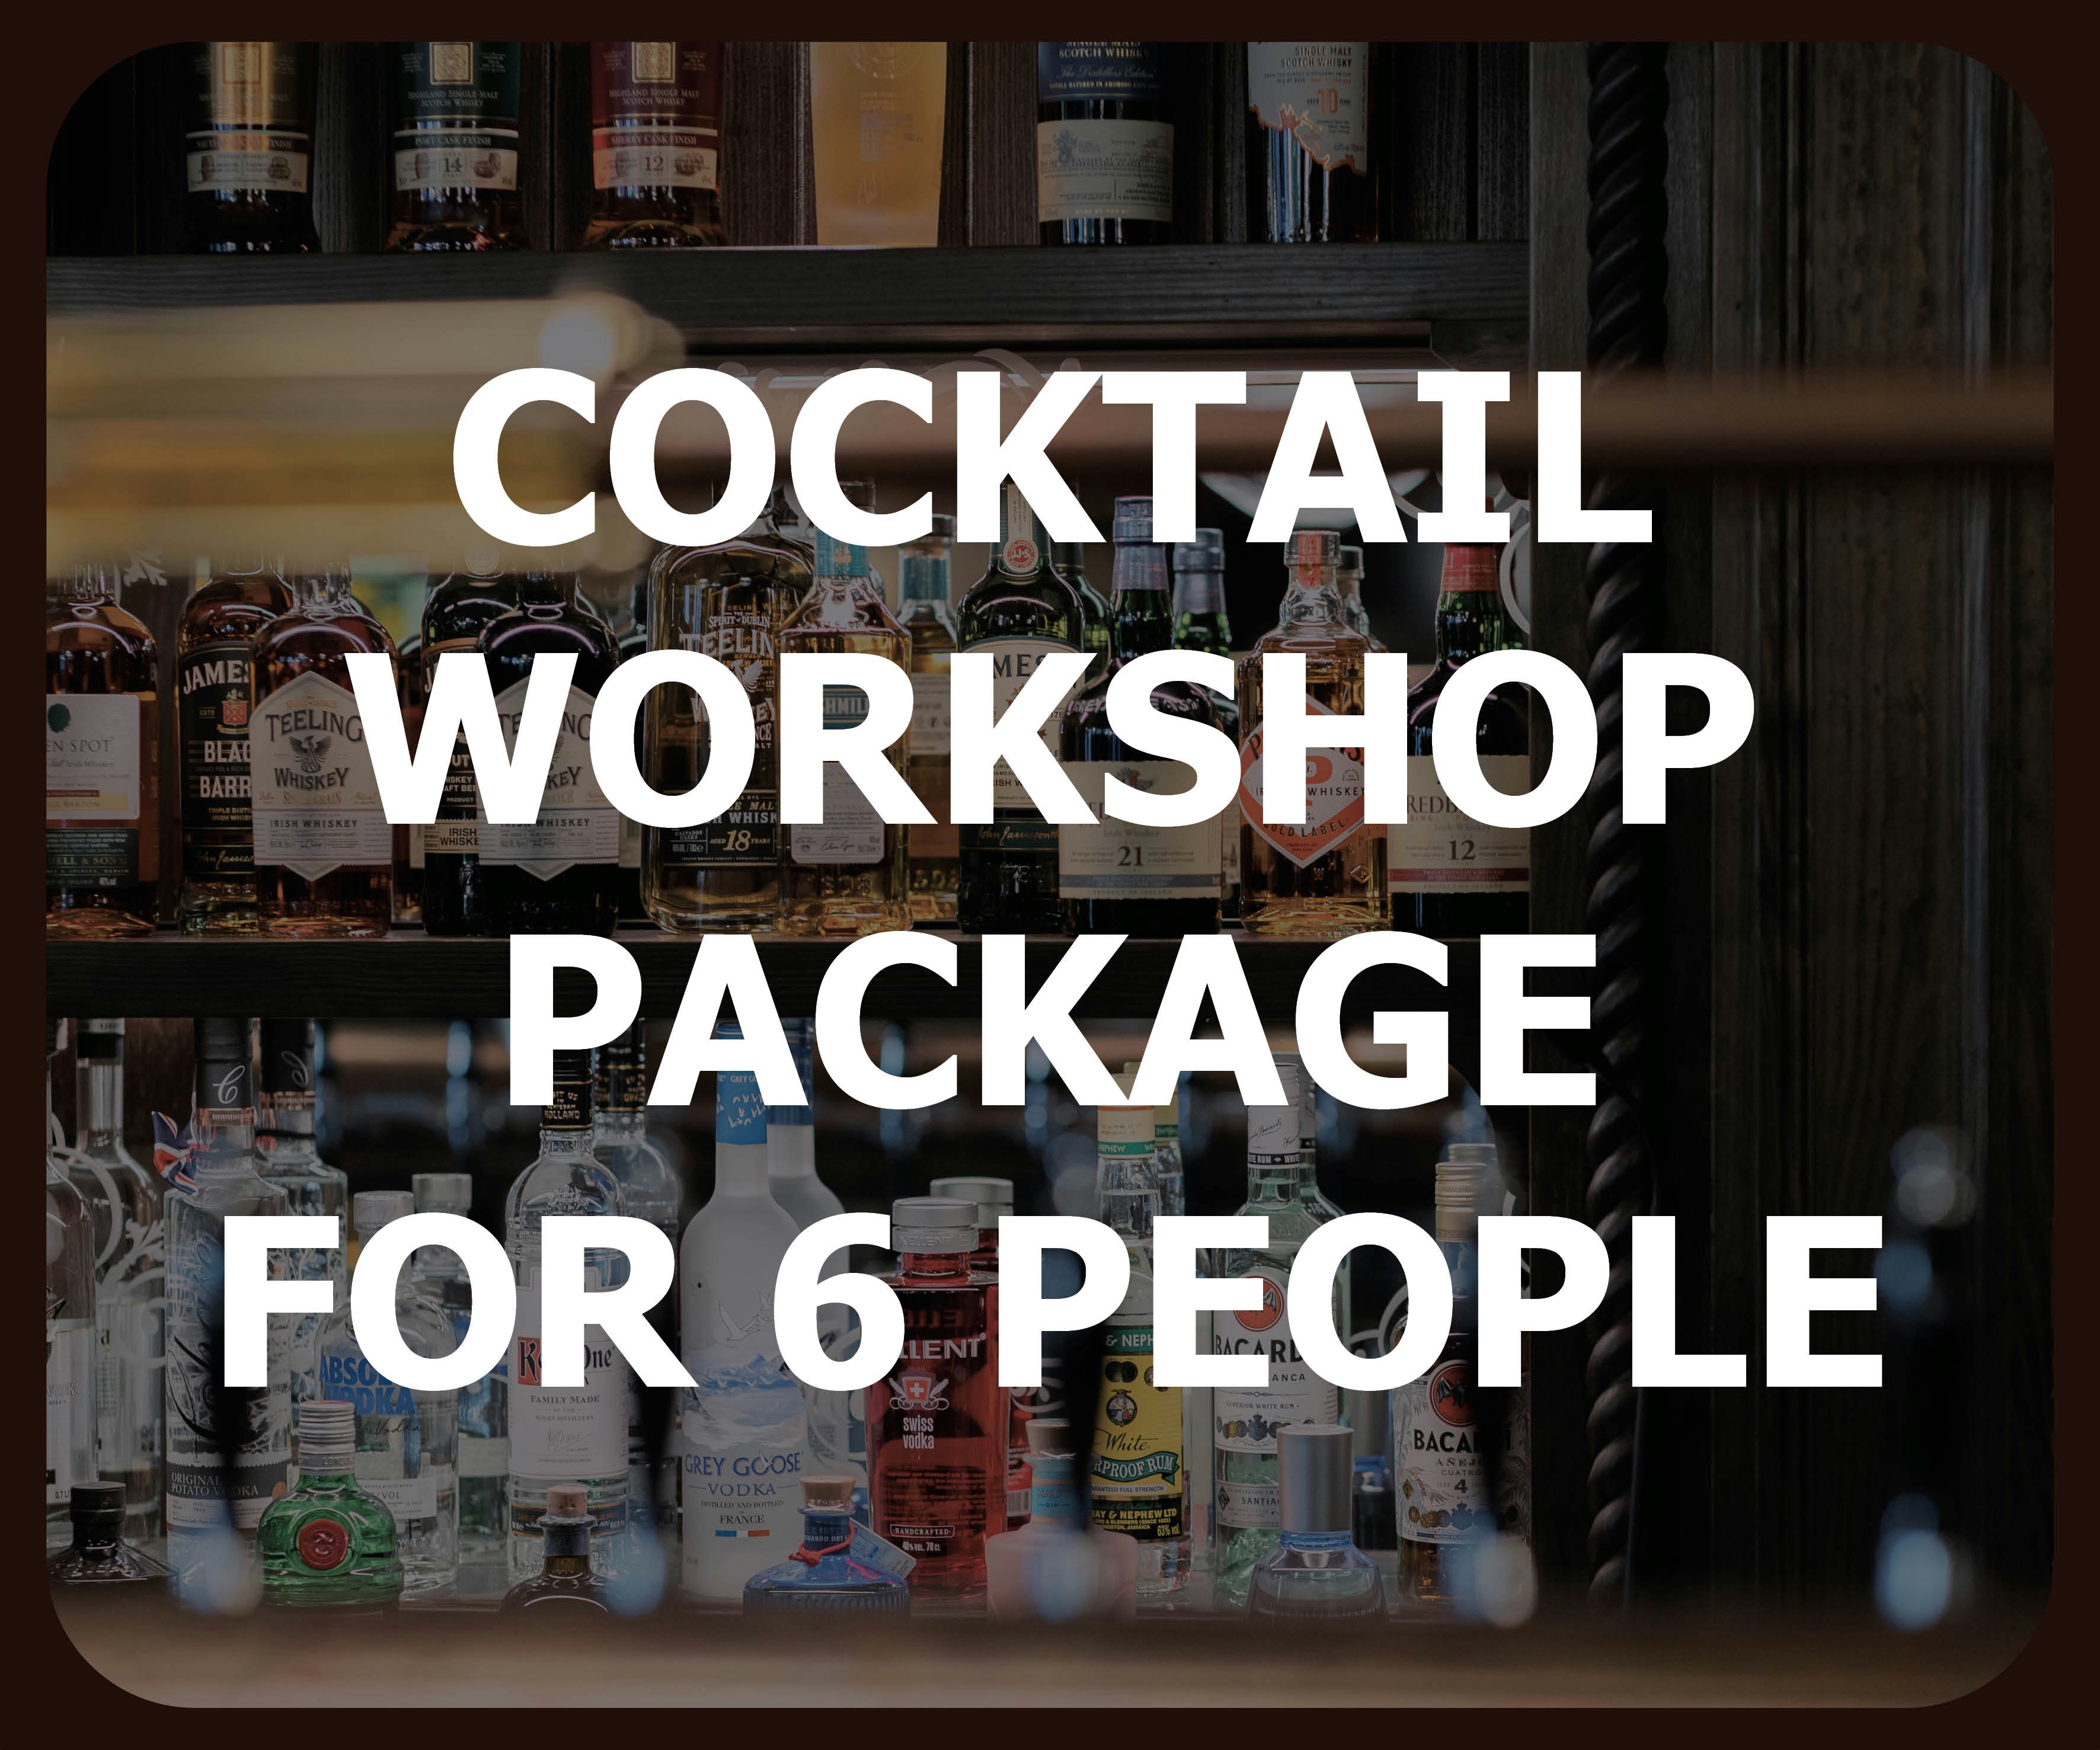 Cocktail workshop – fun course package for 6 people